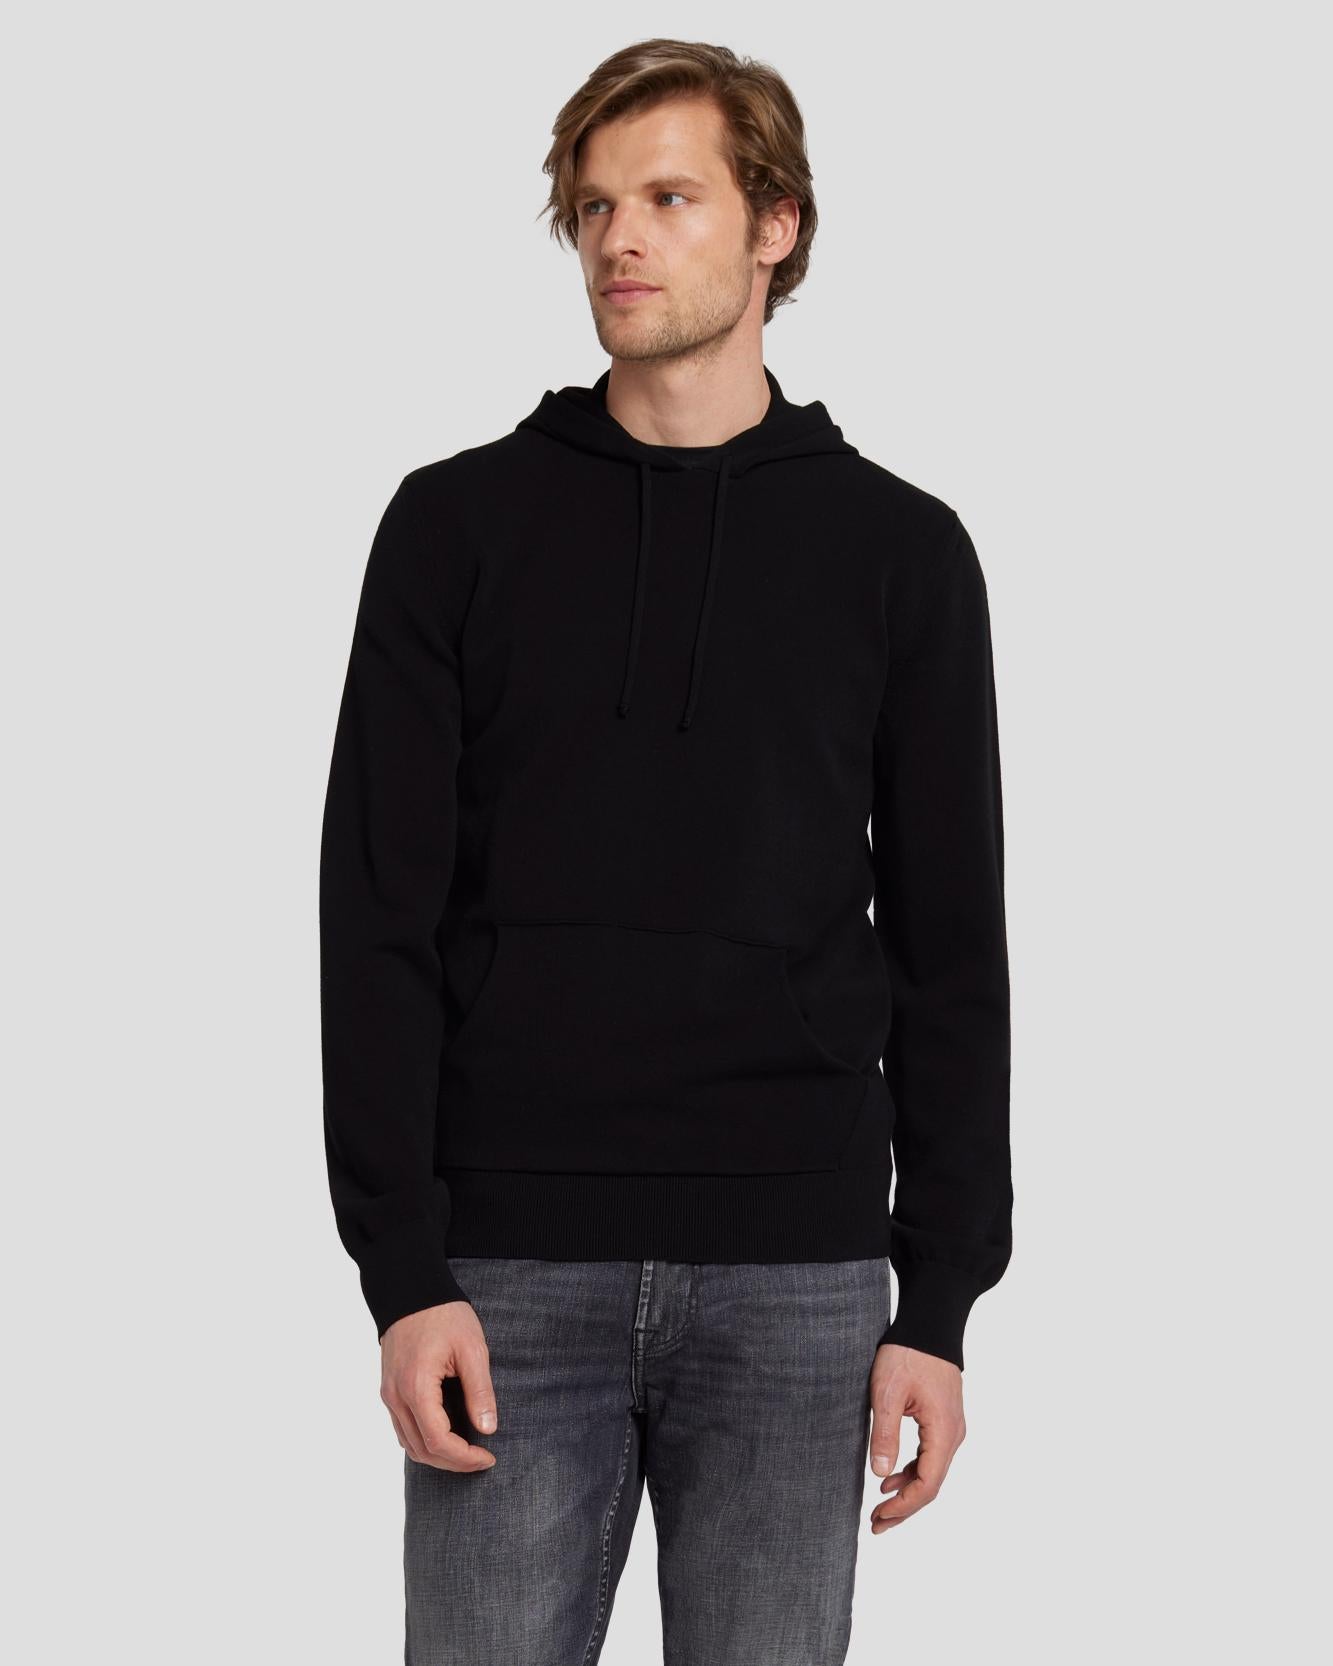 7 For All Mankind Dynamic Luxe Hoodie in Black 7MSJMH14BLK